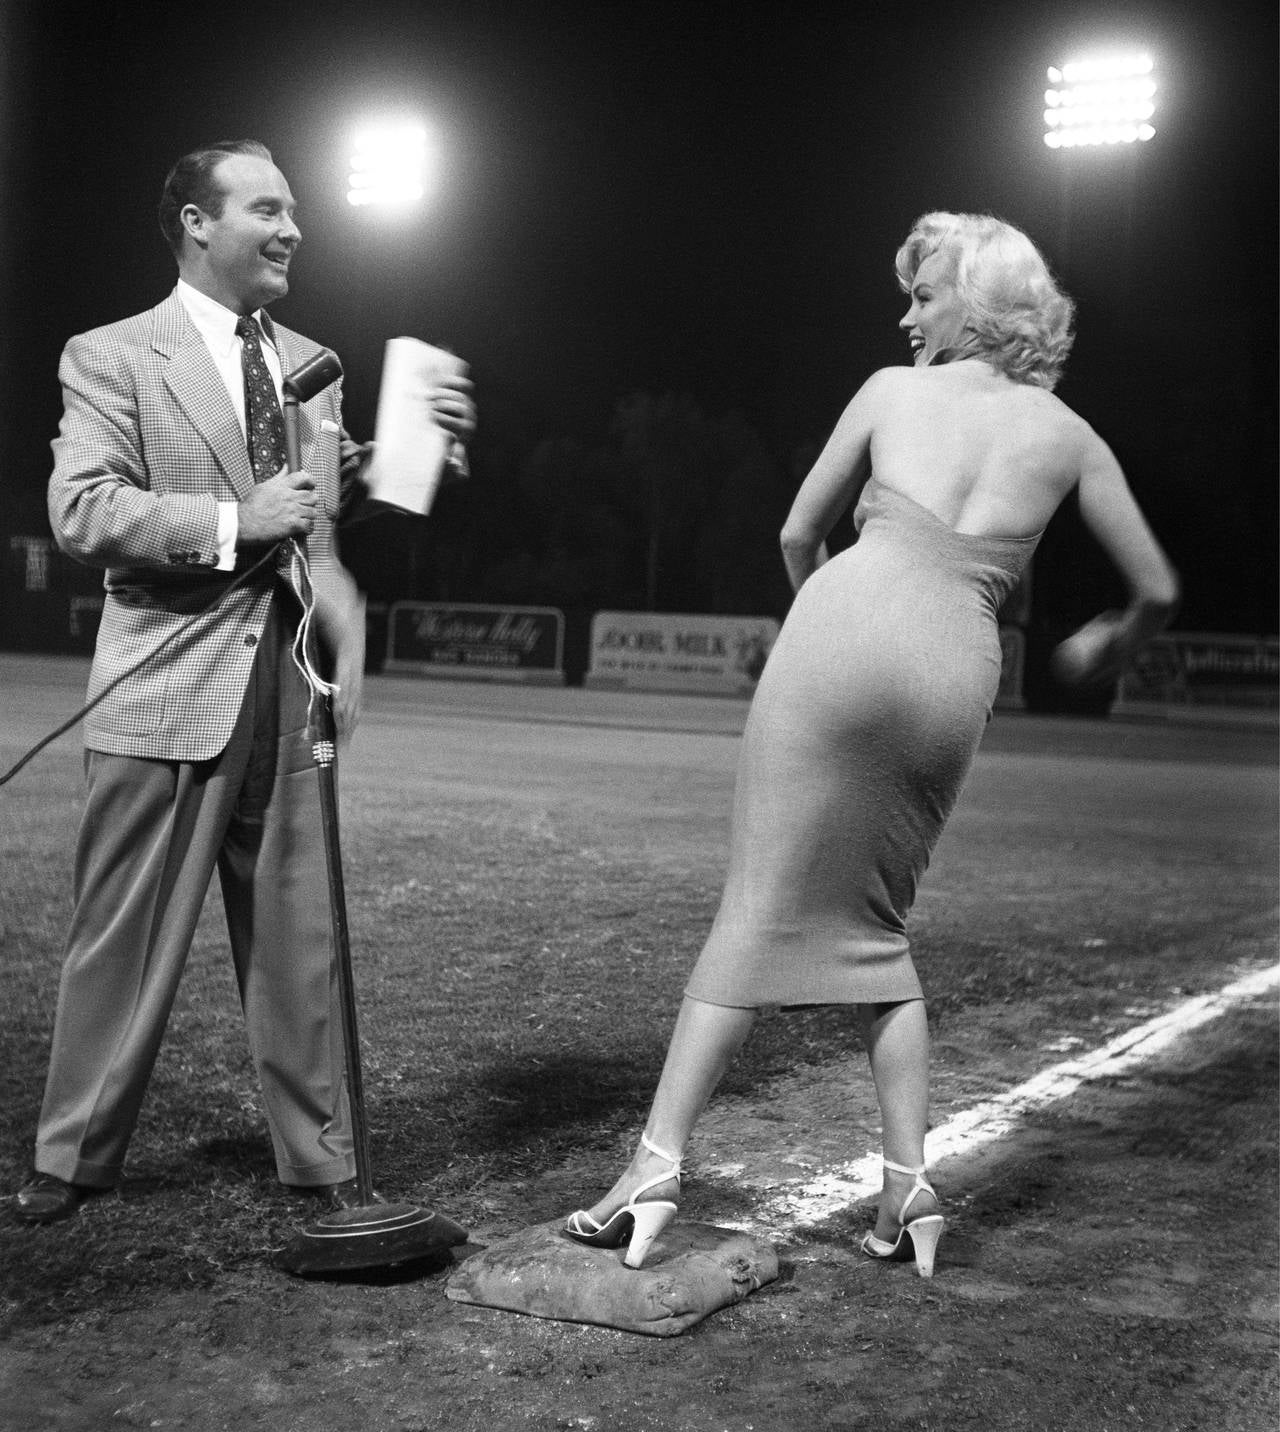 Frank Worth Portrait Photograph - Marilyn Monroe Throws Out the First Pitch